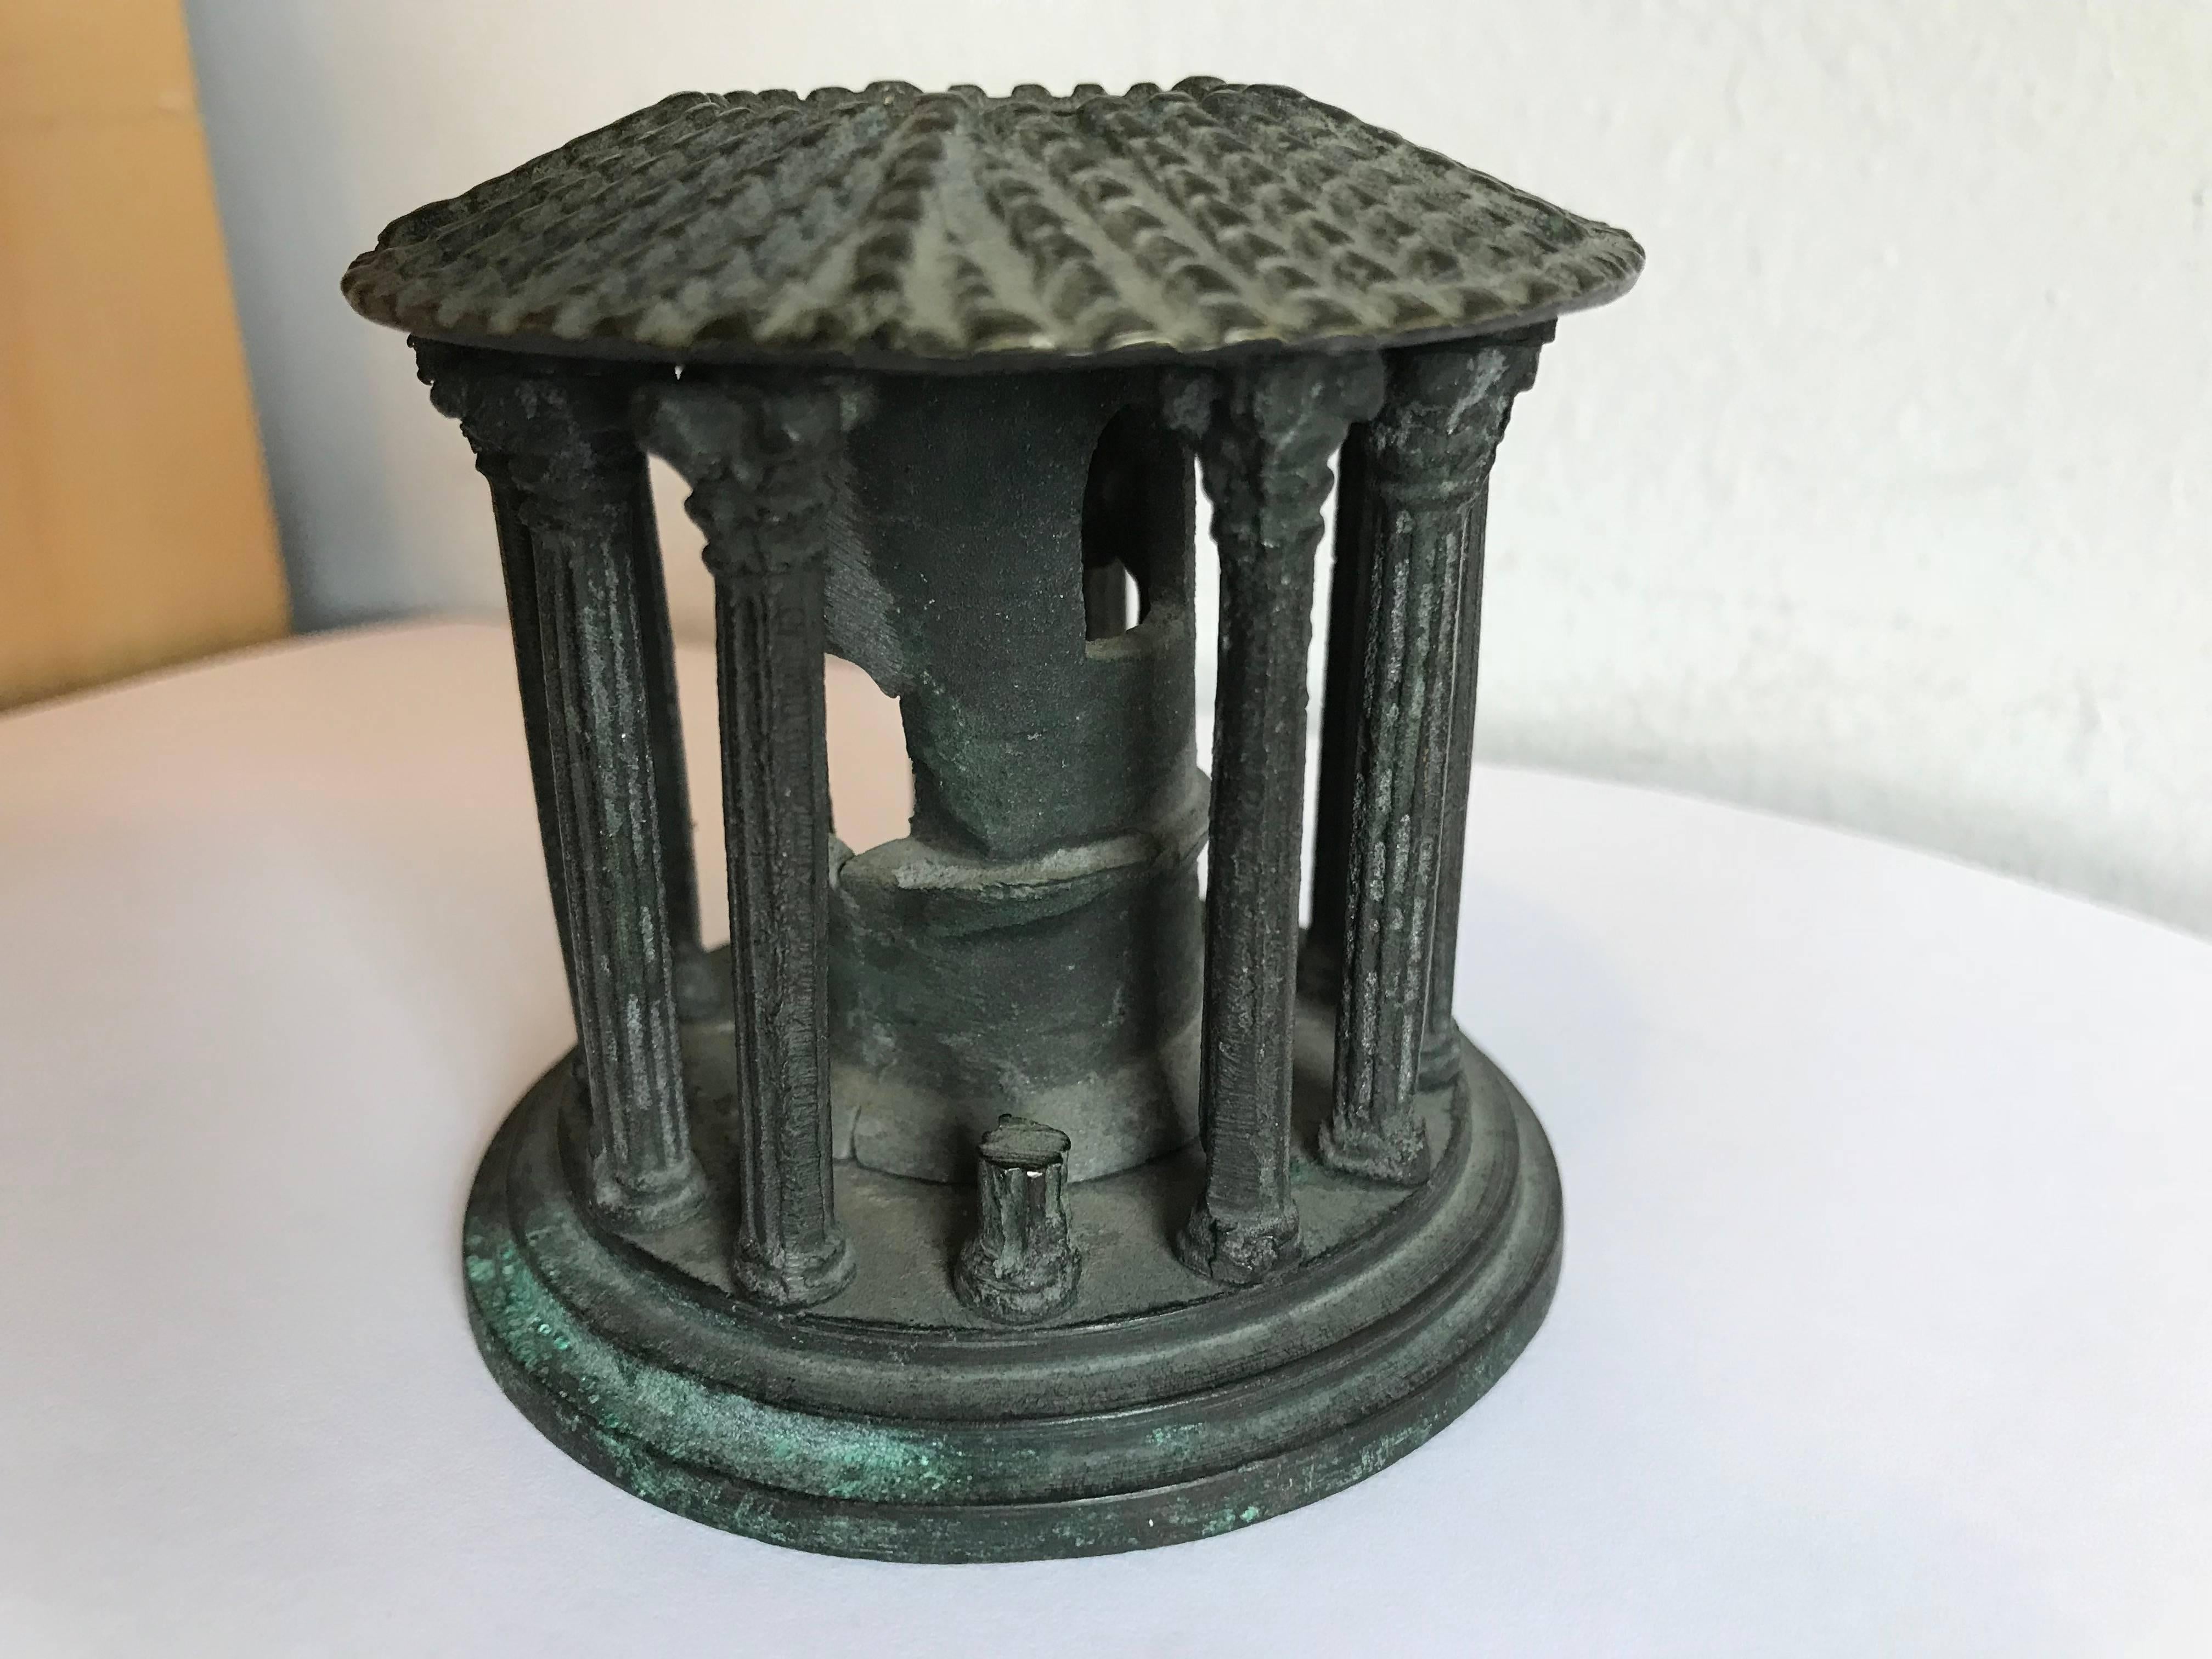 Italian bronze Grand Tour architectural model of the ancient Roman landmark, The temple of Vesta, known also as The Temple of Hercules Victor. The temple was popular with travelers making the Grand Tour' of the ancient sites of Rome, they would